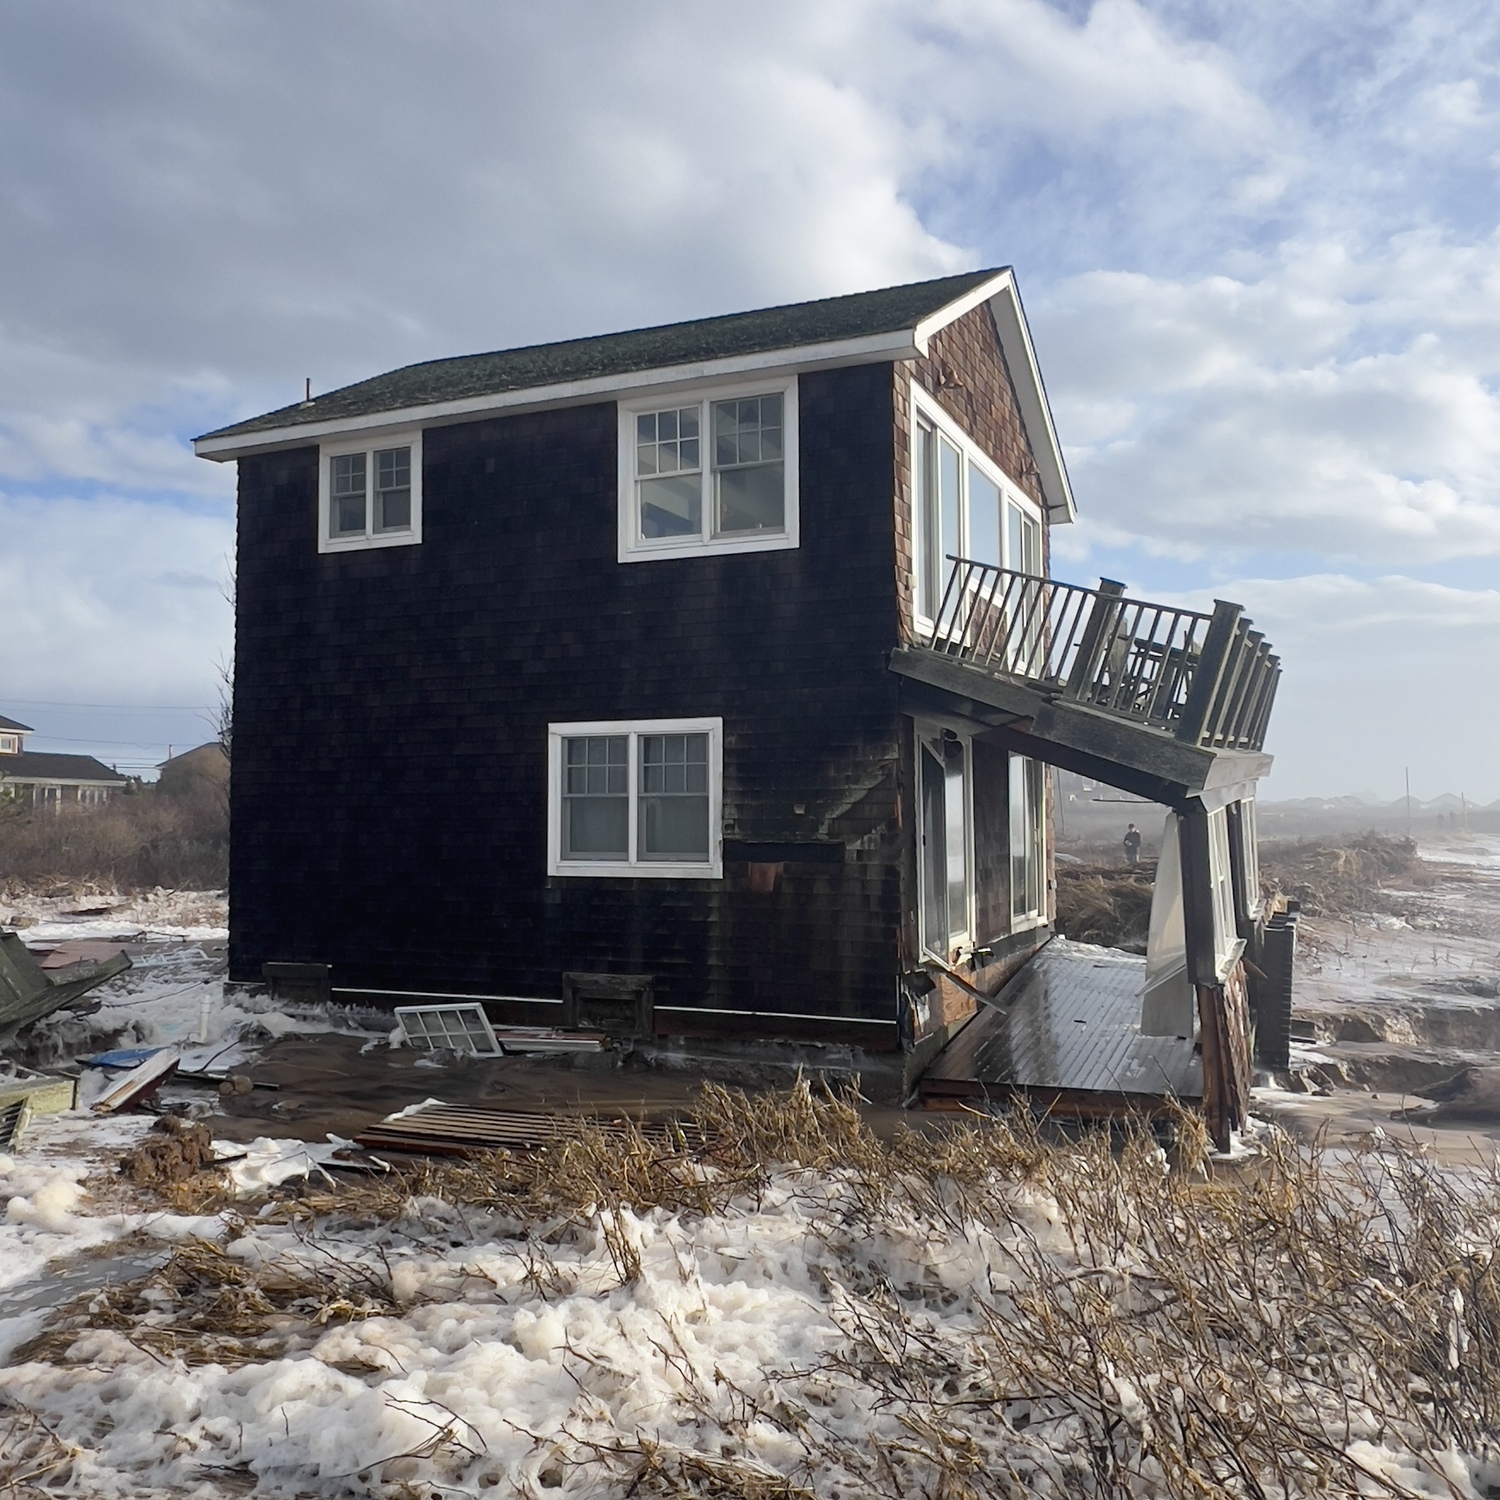 A home near the water at Ditch Plains was damaged in the recent storms and now has nothing between it and the water but the low beach. The owners have contacted town officials about what can be done to protect the home. DOUG KUNTZ